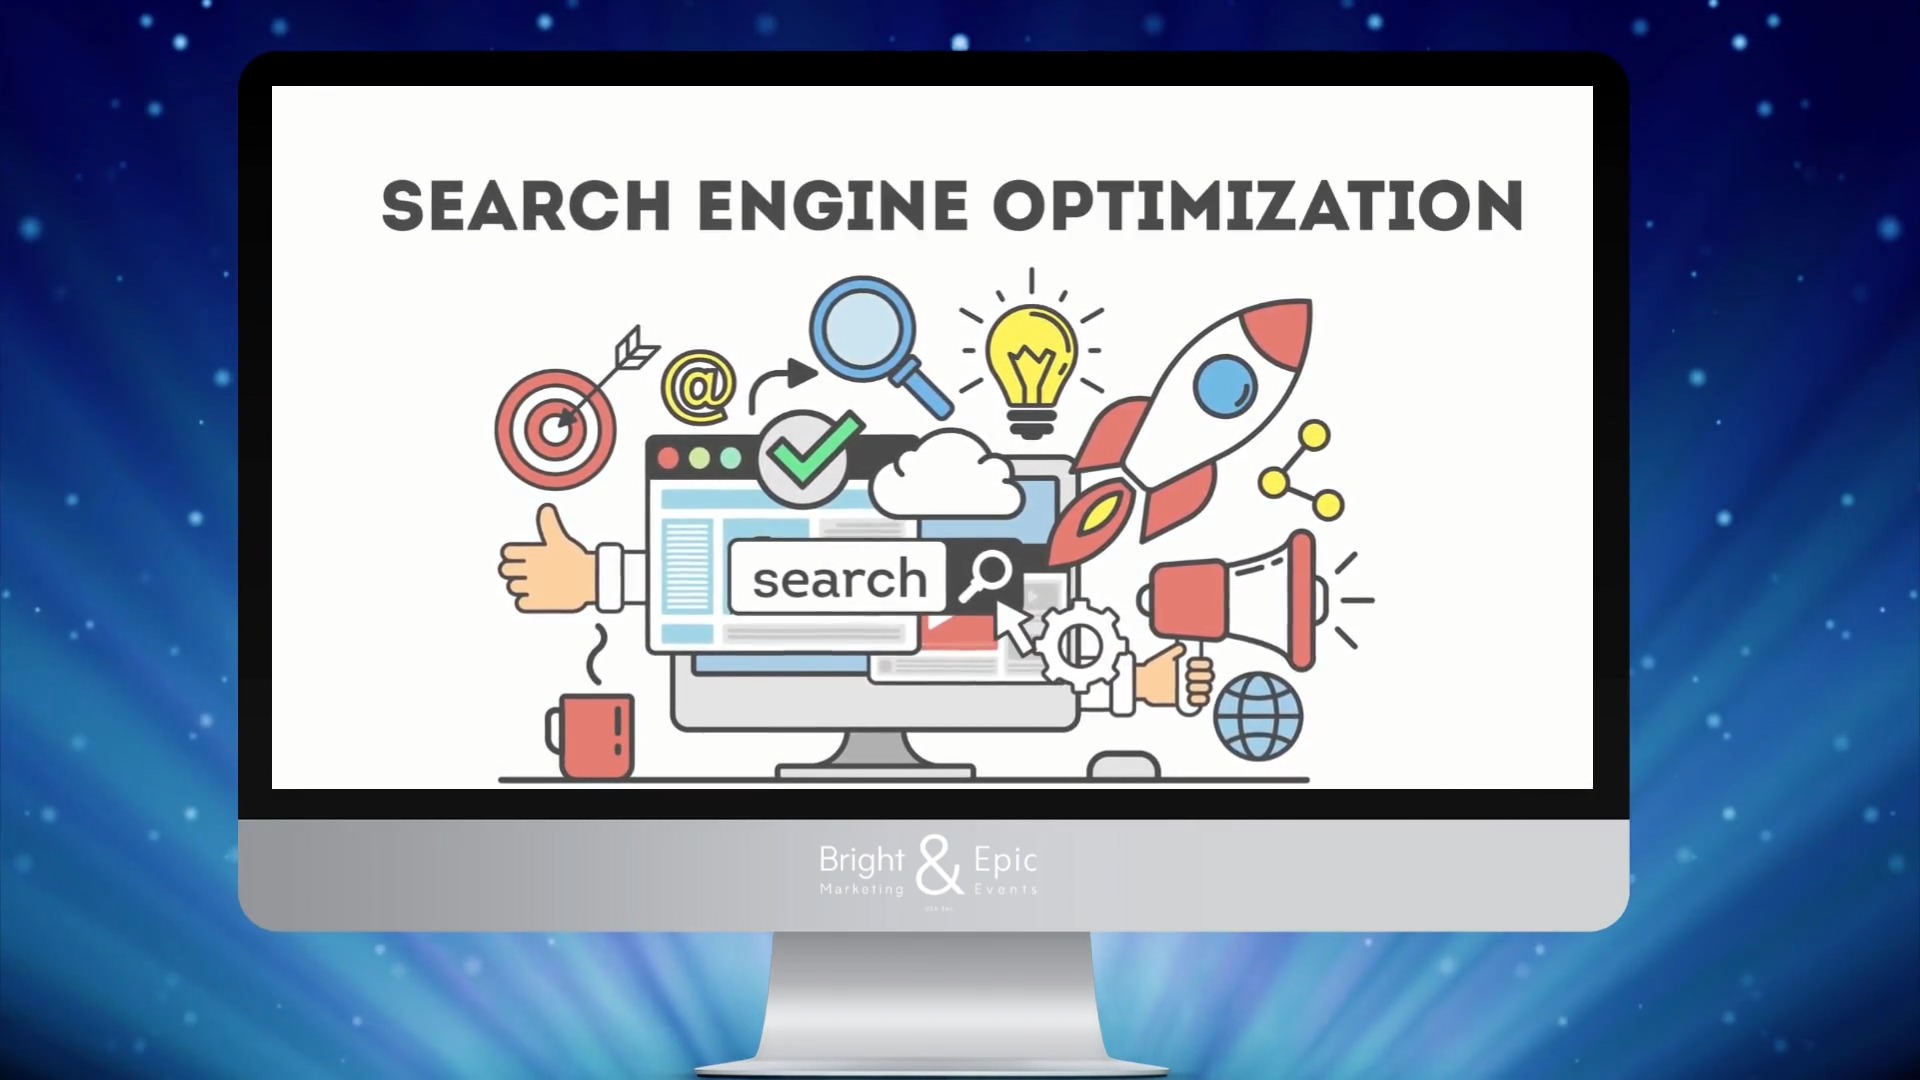 Top Florida SEO Company - Bright and Epic. Learn more about our SEO and SEM strategies in the USA.